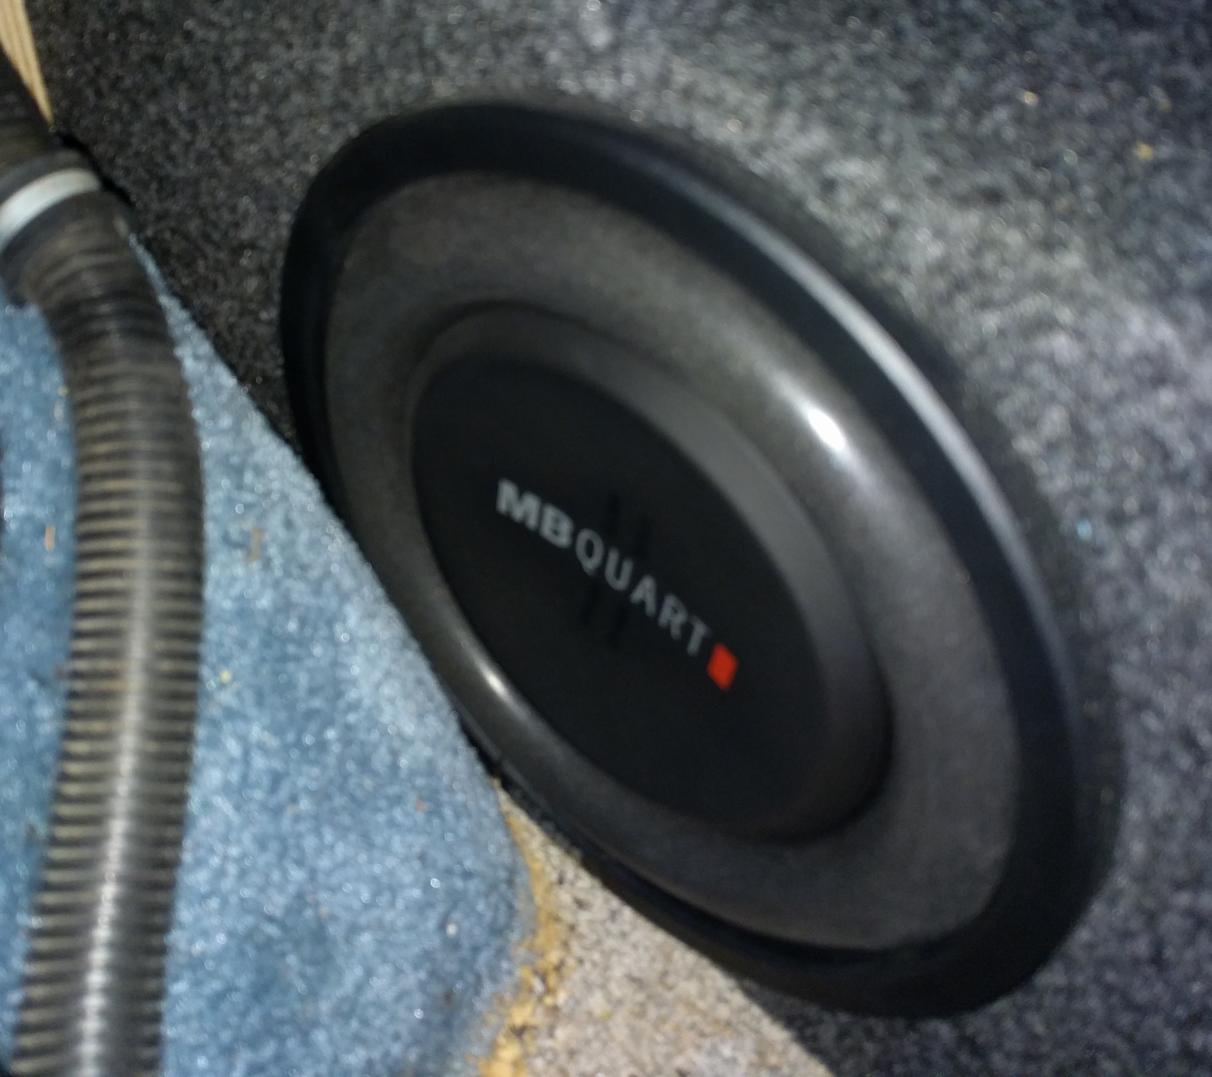 Ray put a new MBQuart subwoofer in!  I love its dedicated volume knob on the dash.